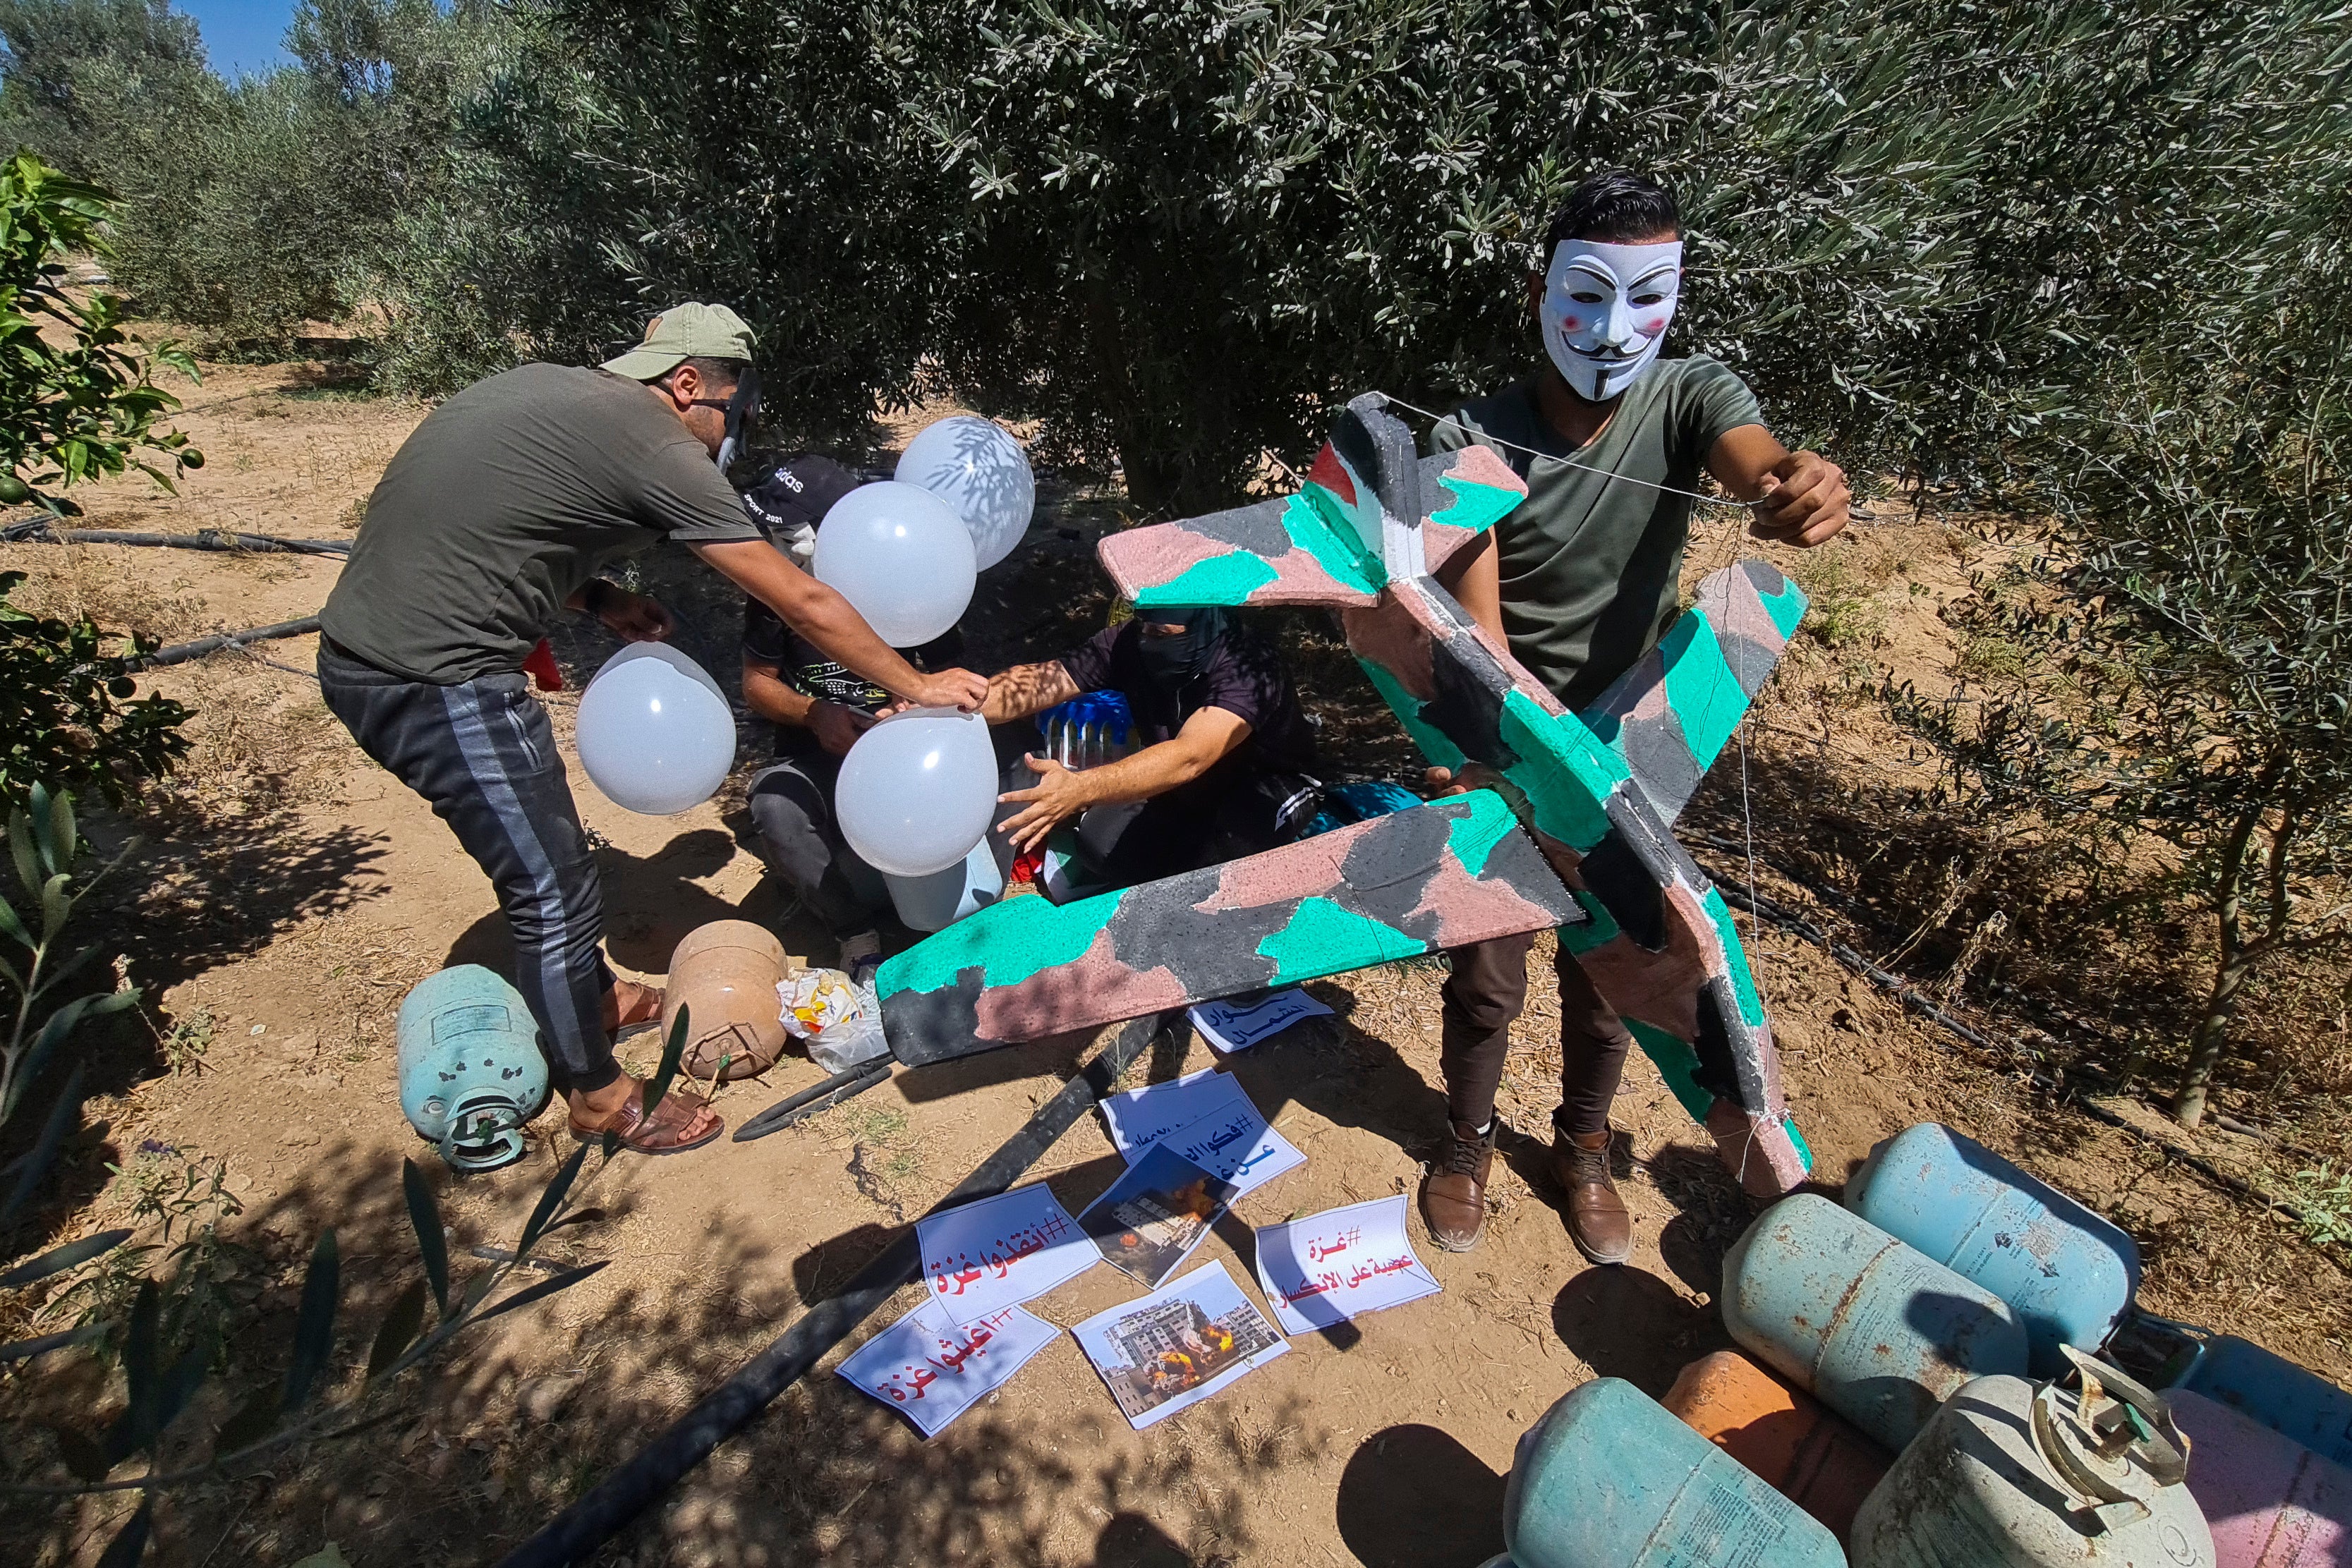 Masked Hamas-affiliated operatives launched balloons towards Israel, next to the eastern border of Gaza Strip, prompting Israel to retaliate with air